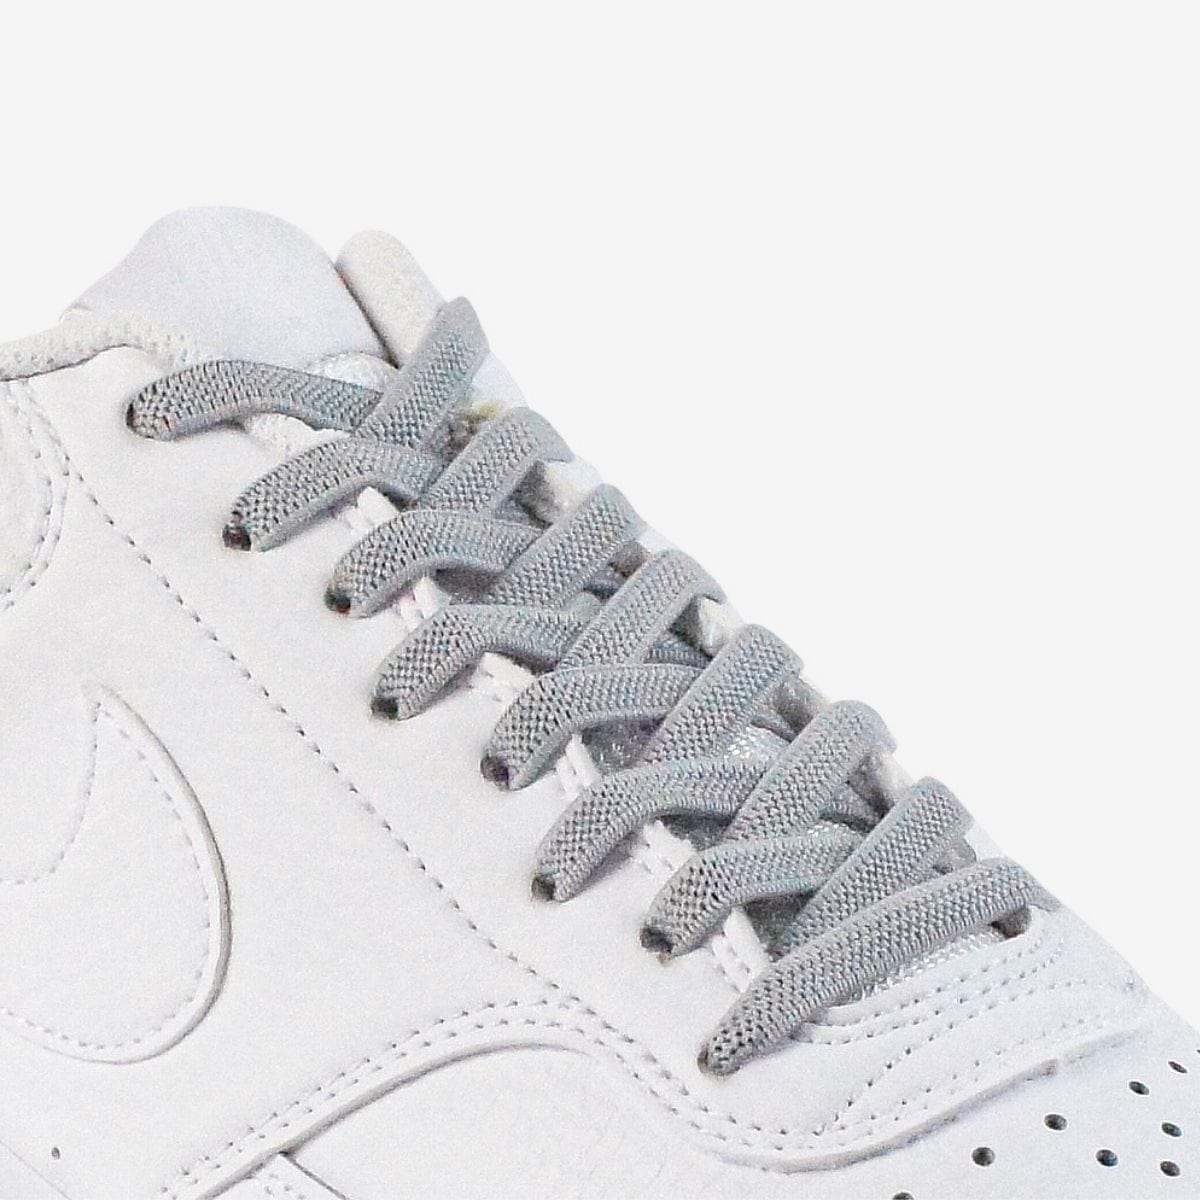 kids-no-tie-shoelaces-with-light-grey-laces-on-nike-white-sneakers-by-kicks-shoelaces